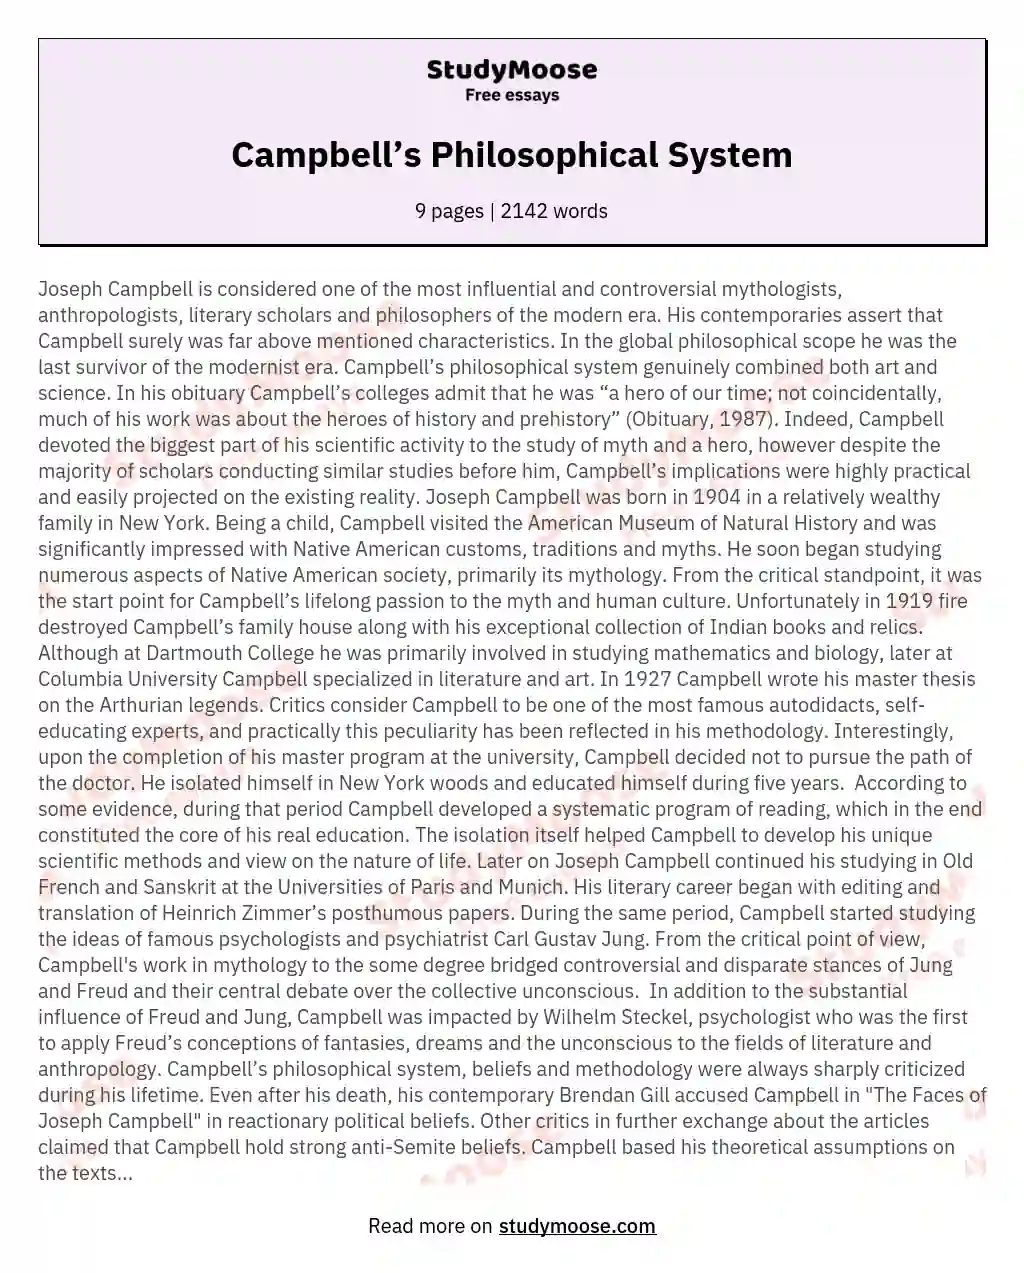 Campbell’s Philosophical System essay